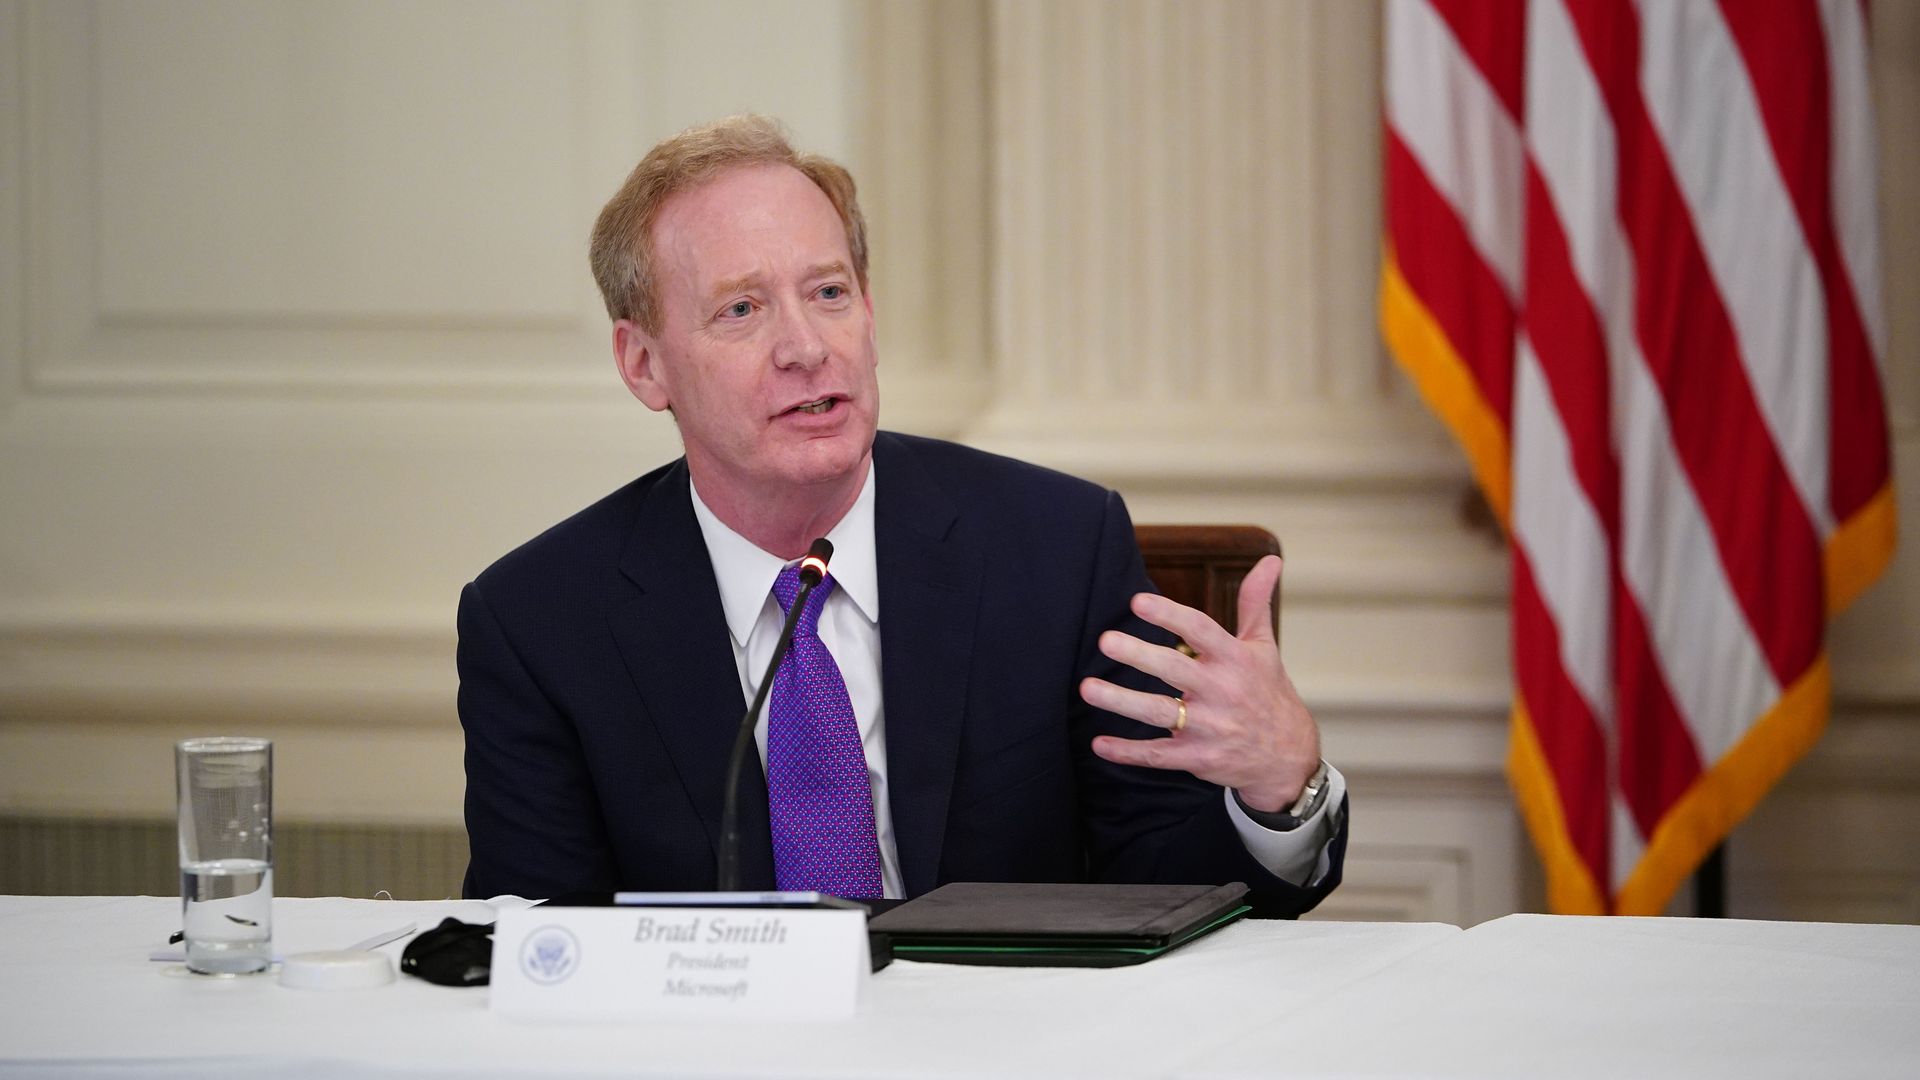 Microsoft President Brad Smith in the White House in May 2020.